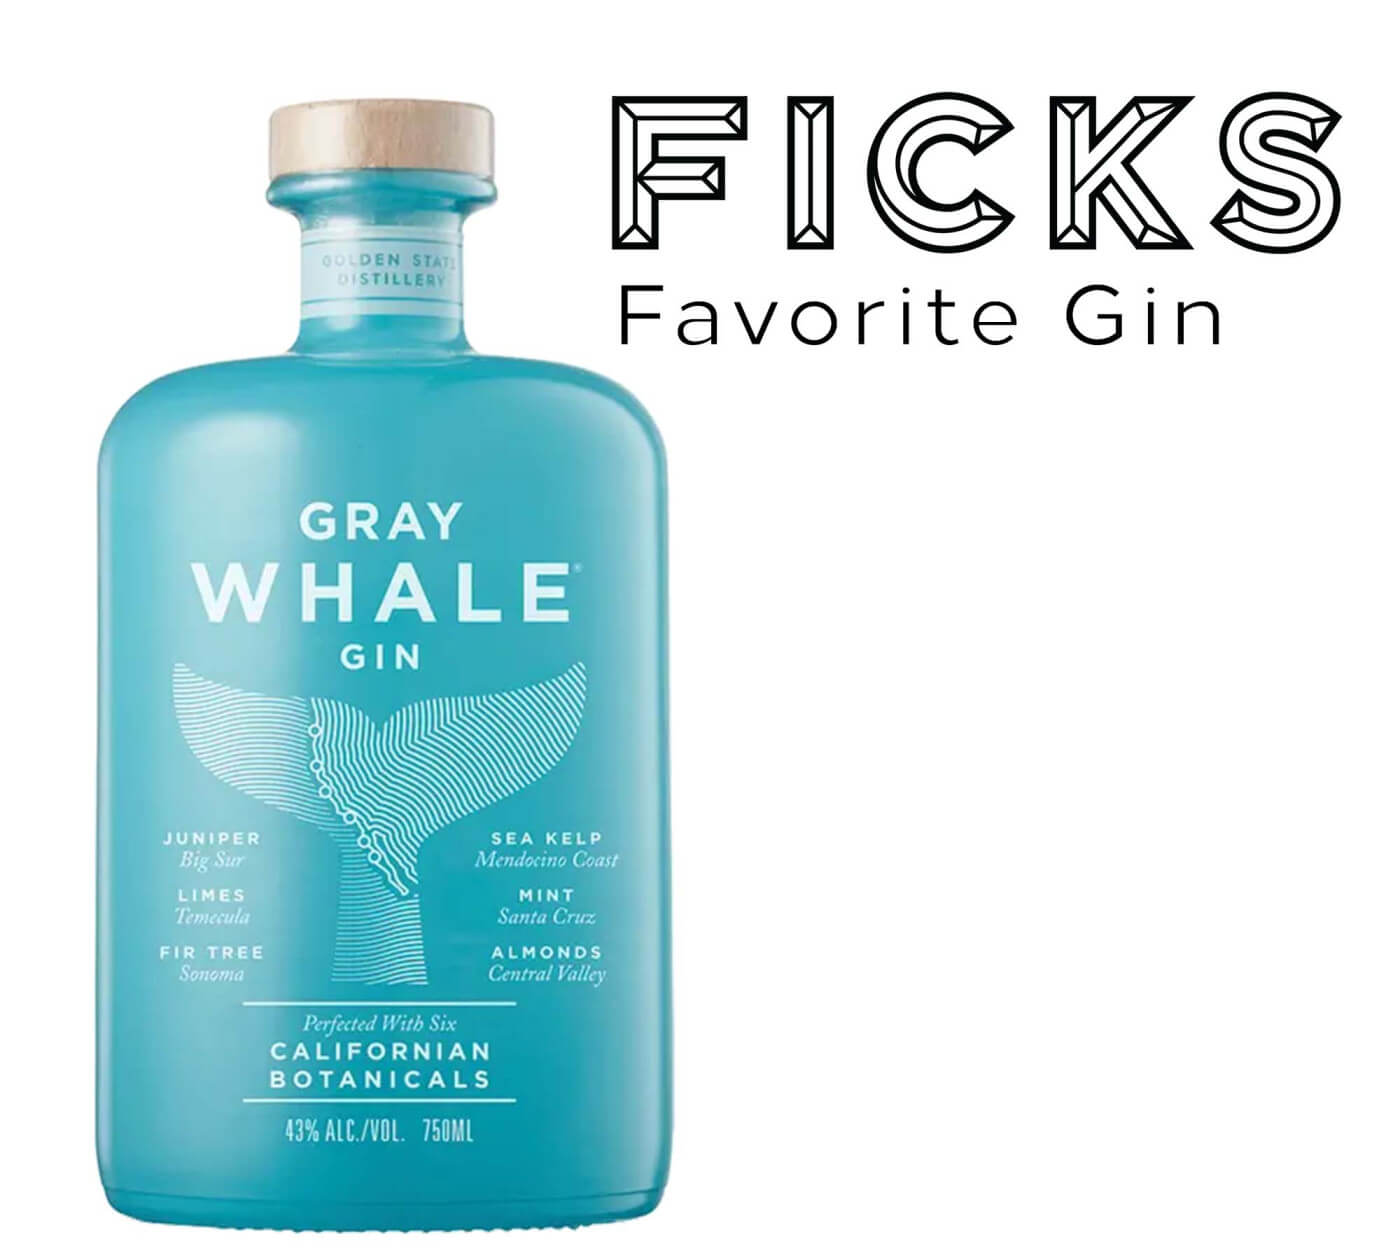 Gray Whale Gin for Bloody Mary